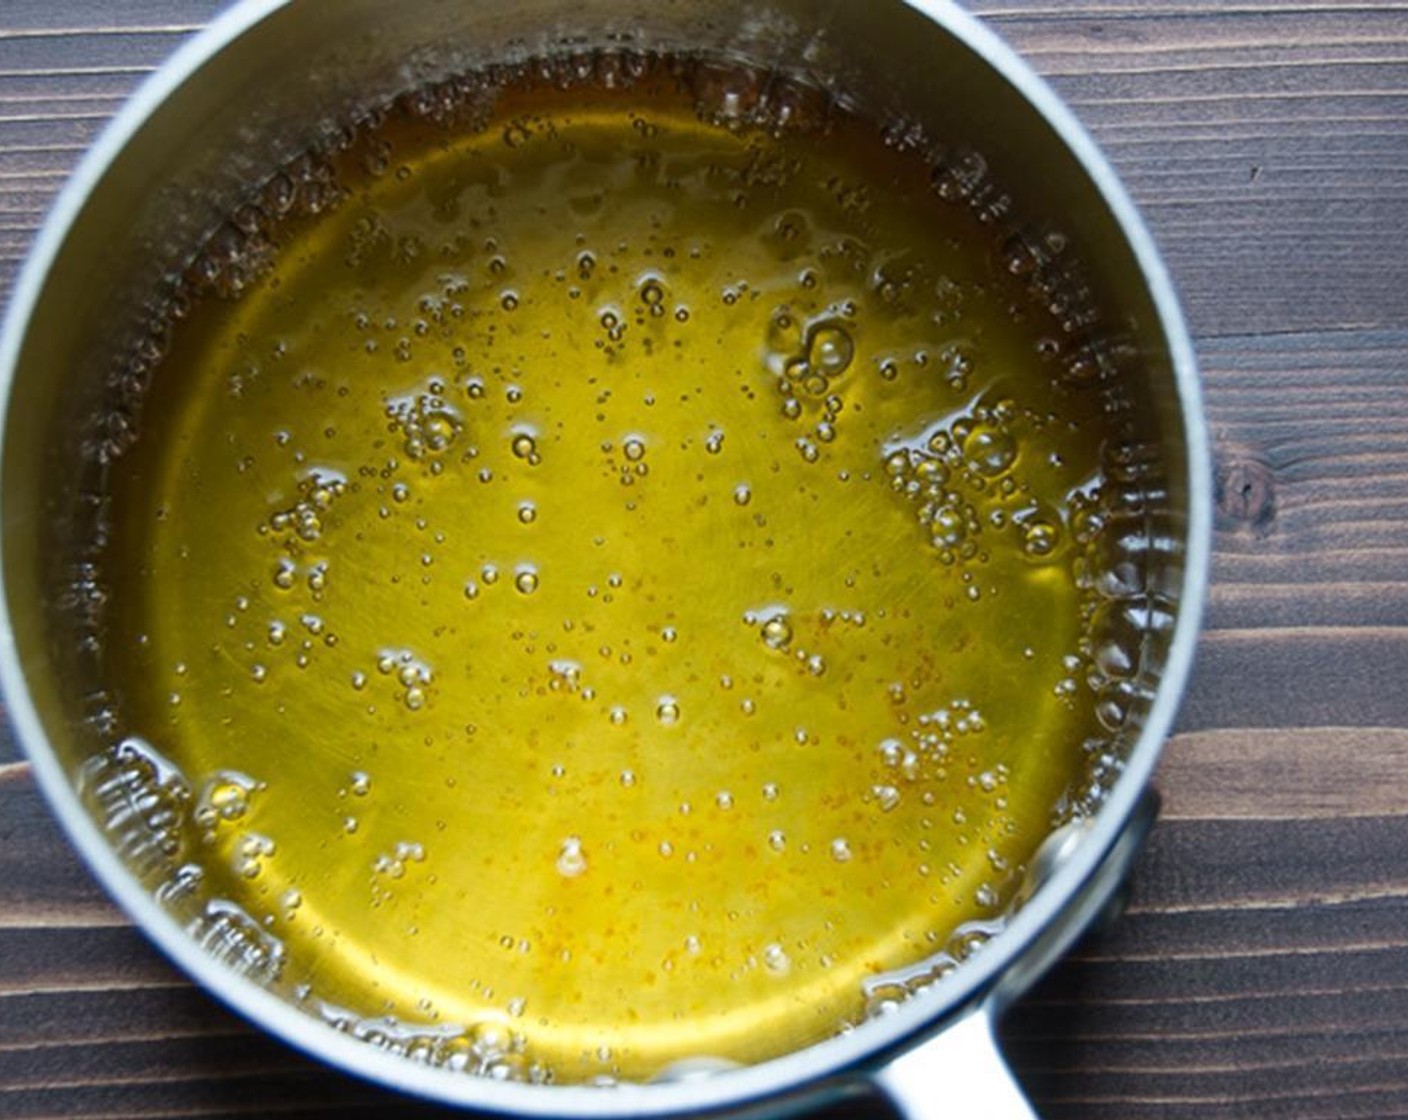 step 4 In a small heavy saucepan, combine the Honey (1/3 cup), Granulated Sugar (1/2 cup) and Water (1/4 cup). Heat over low heat, stirring constantly until the sugar is dissolved. Bring the mixture to a boil and cook for an additional 2 minutes.